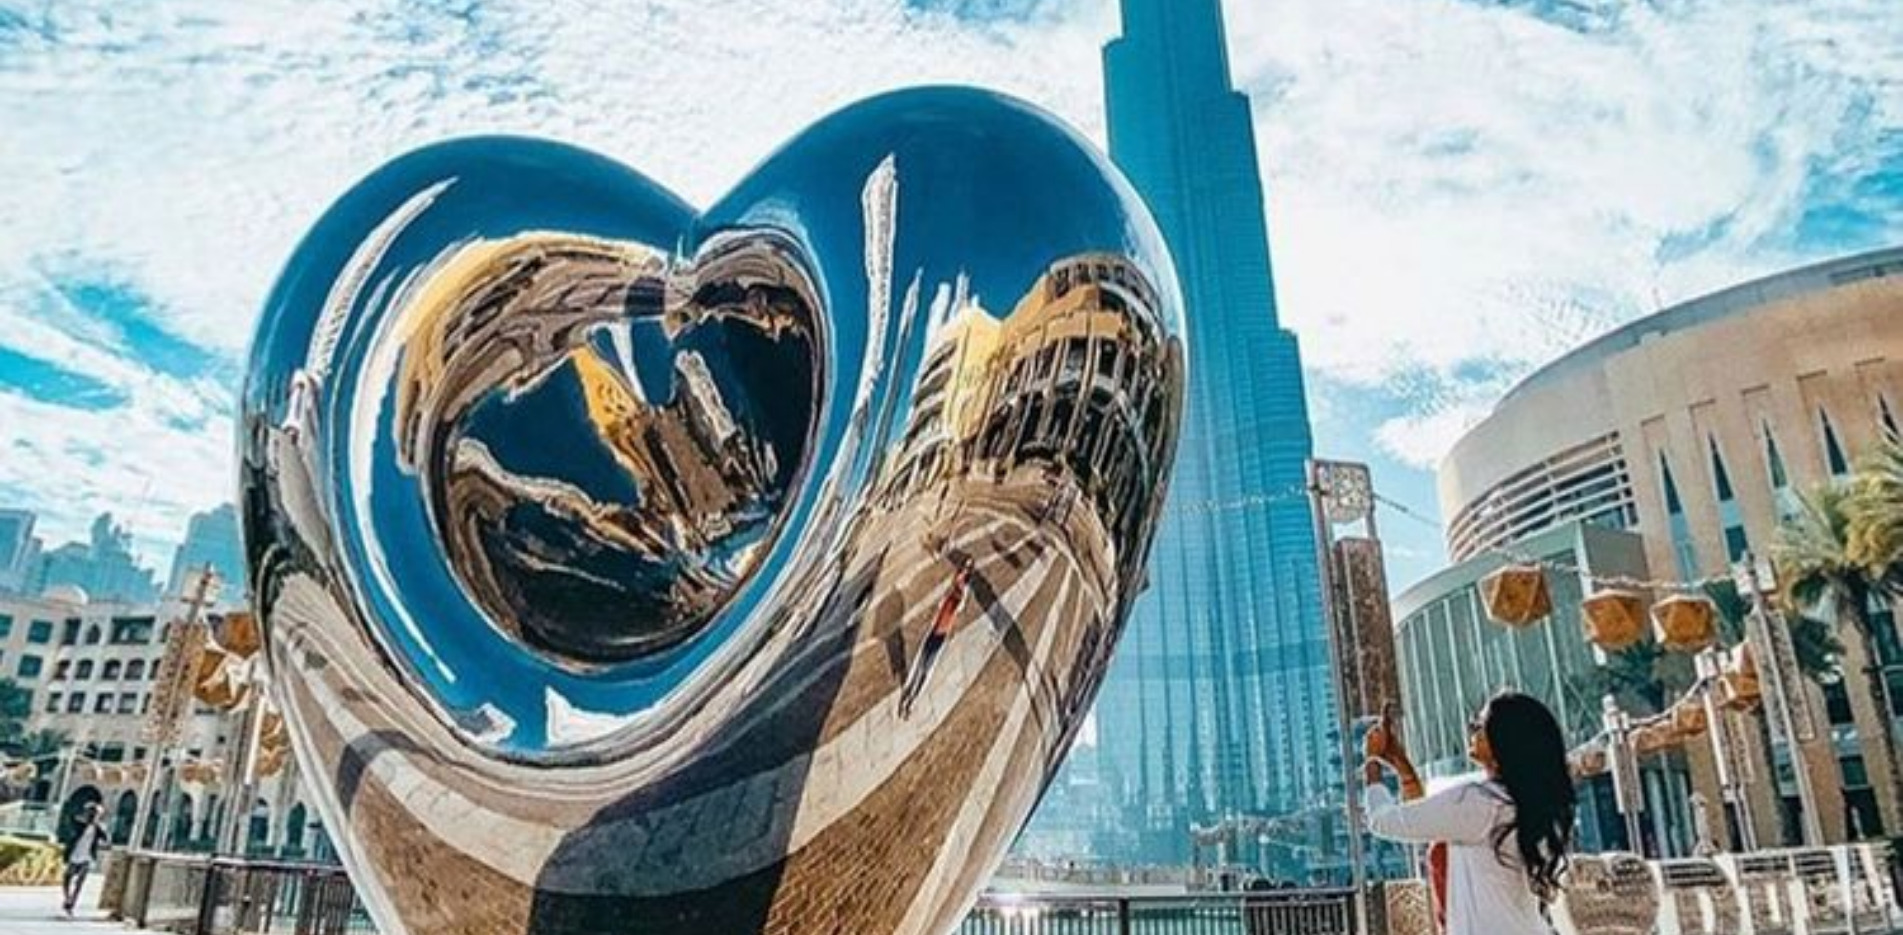  - The 11 Sculptures You Need to Know More About in Dubai